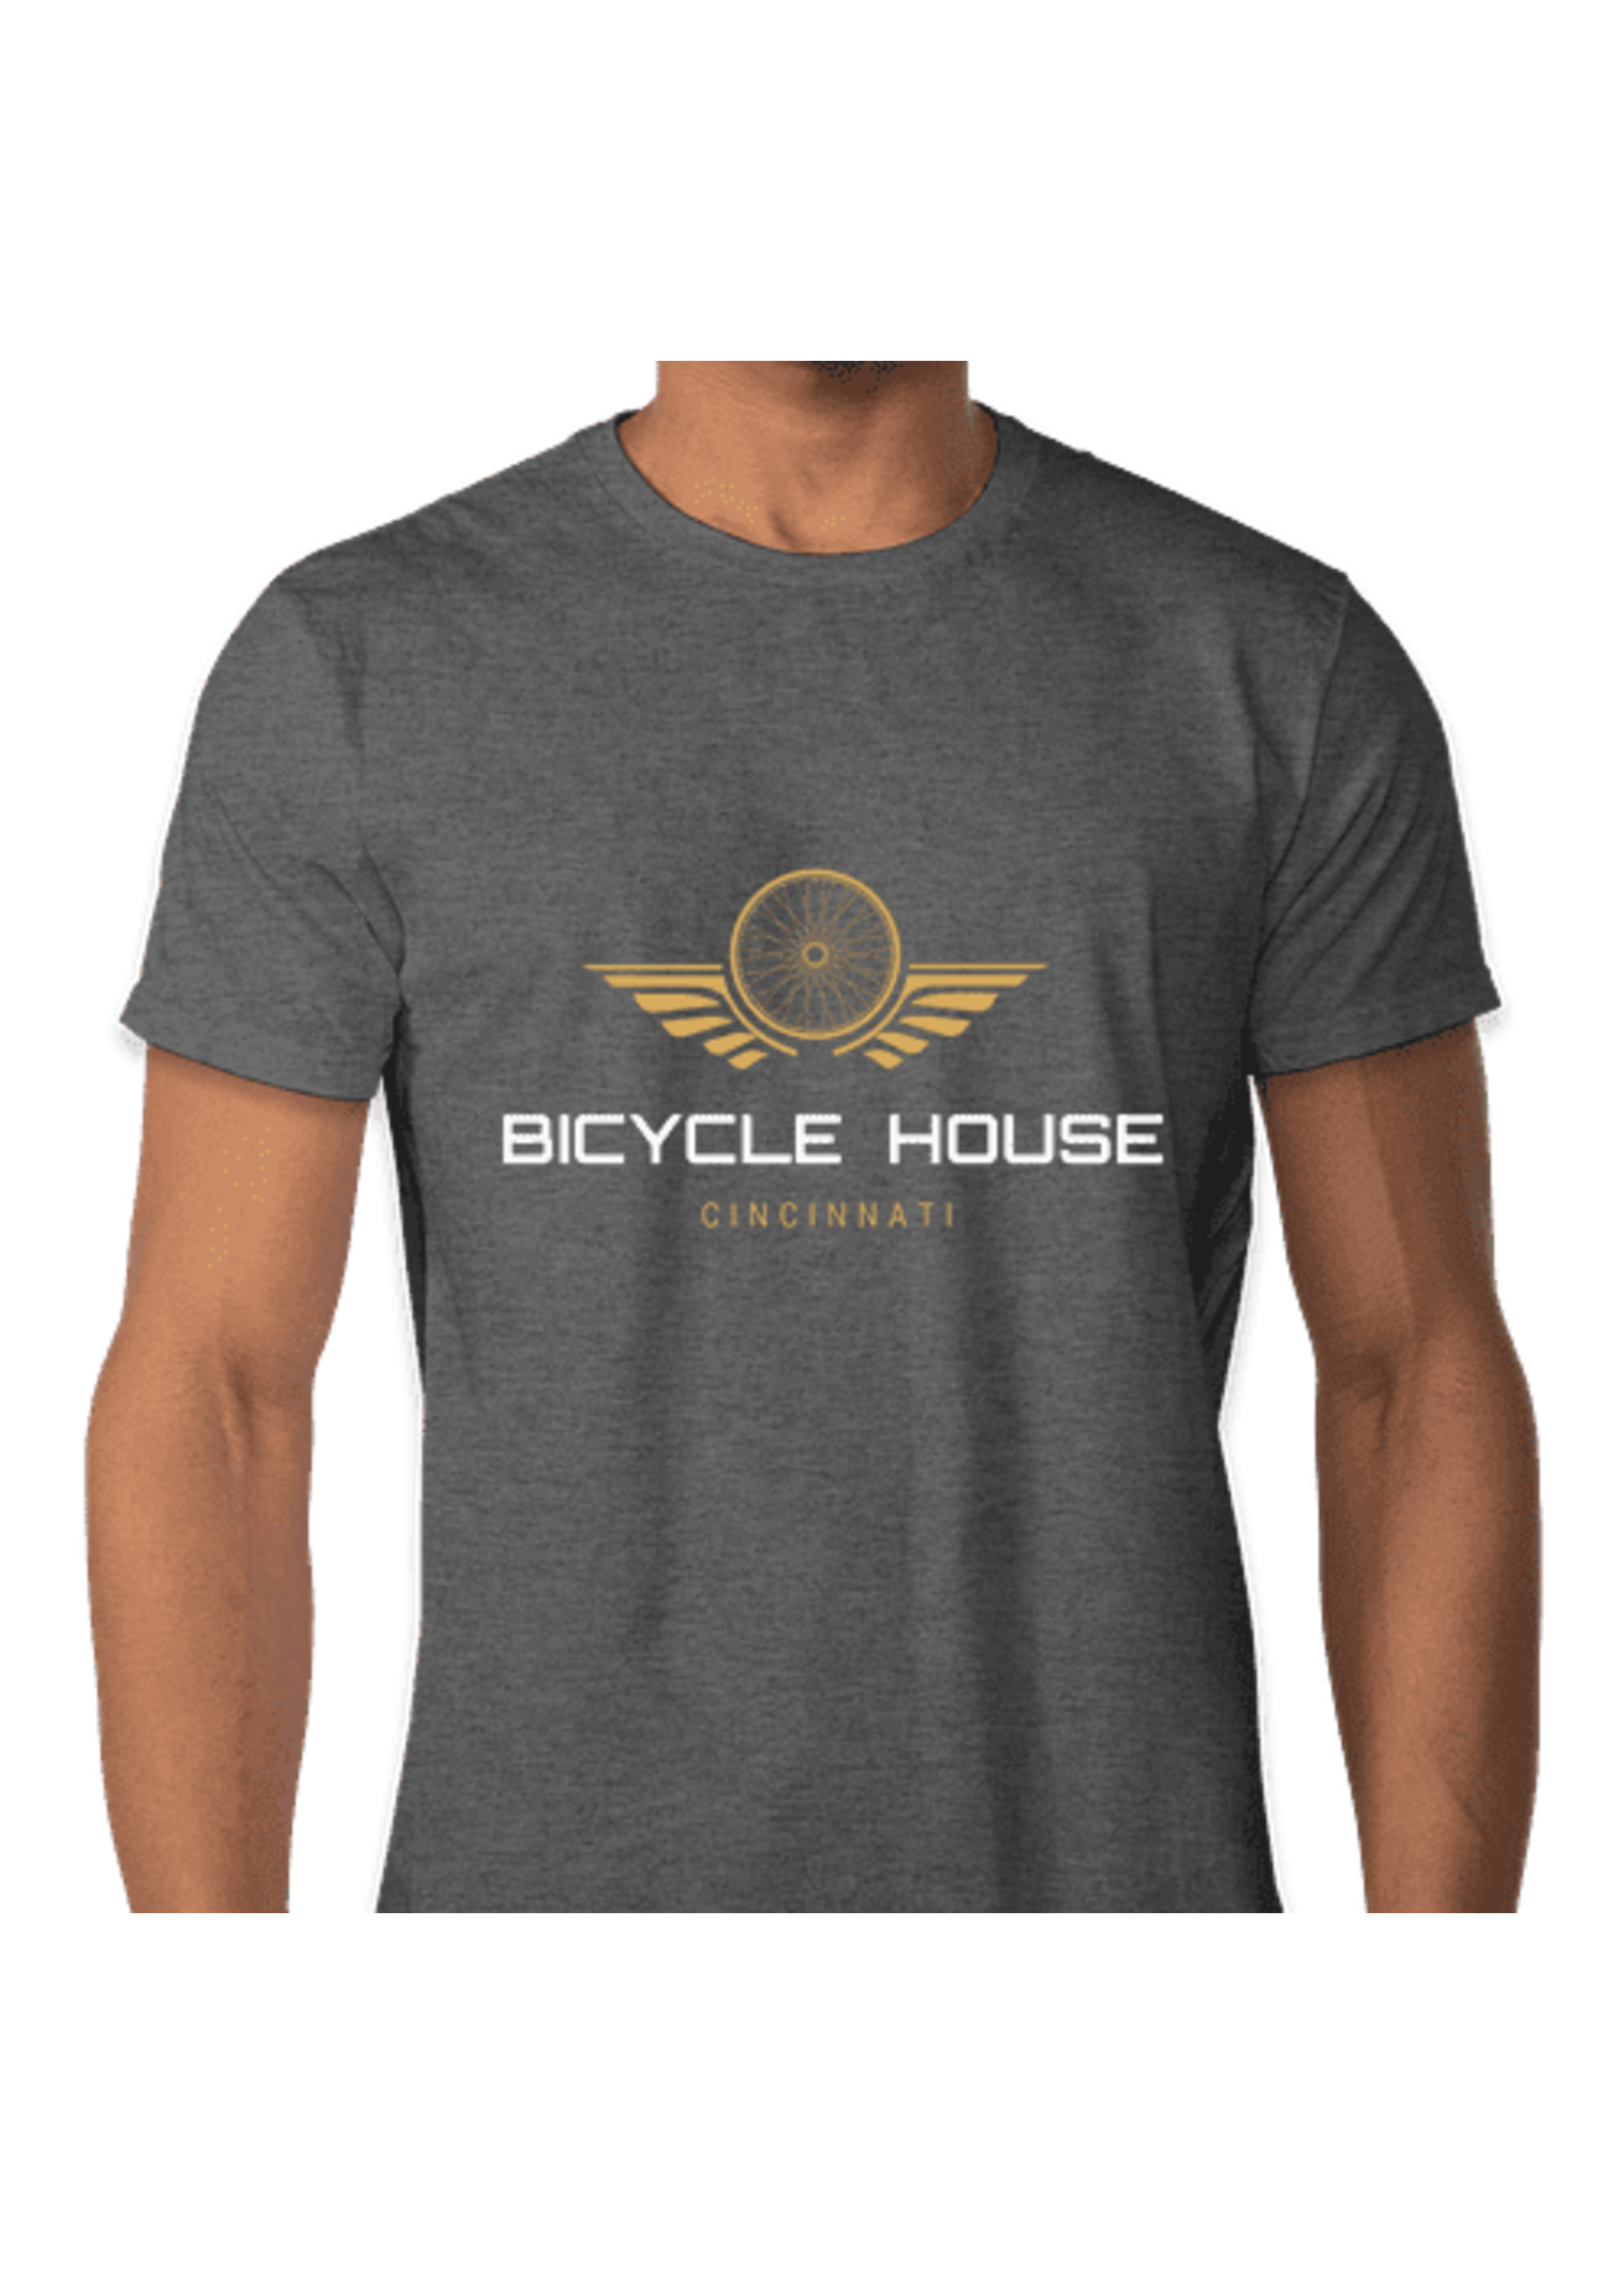 Bicycle House Bicycle House T-shirt